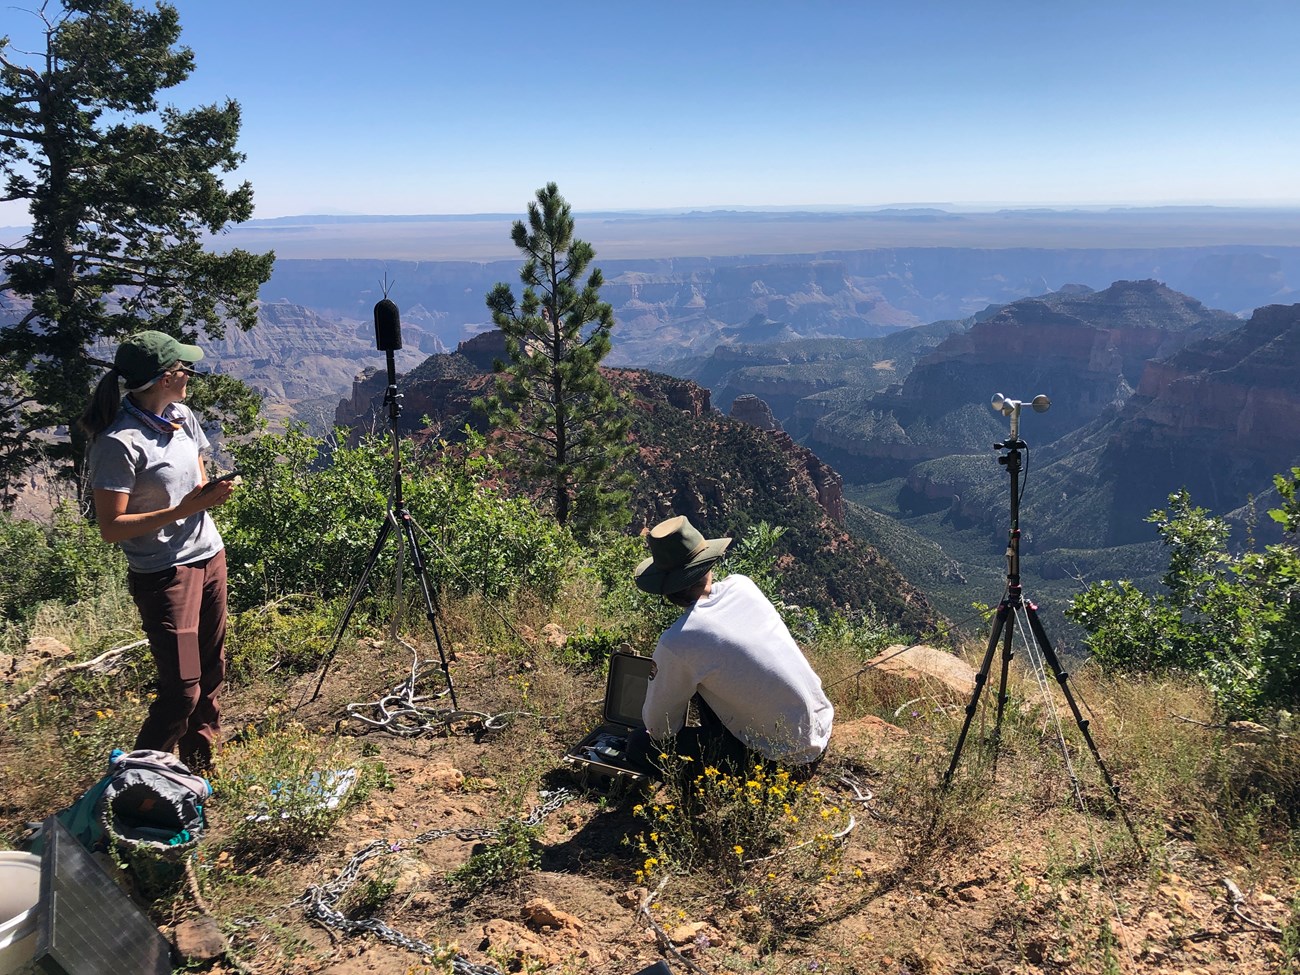 From the edge of a large canyon, two soundscape interns are monitoring noise levels with instruments on tripods.